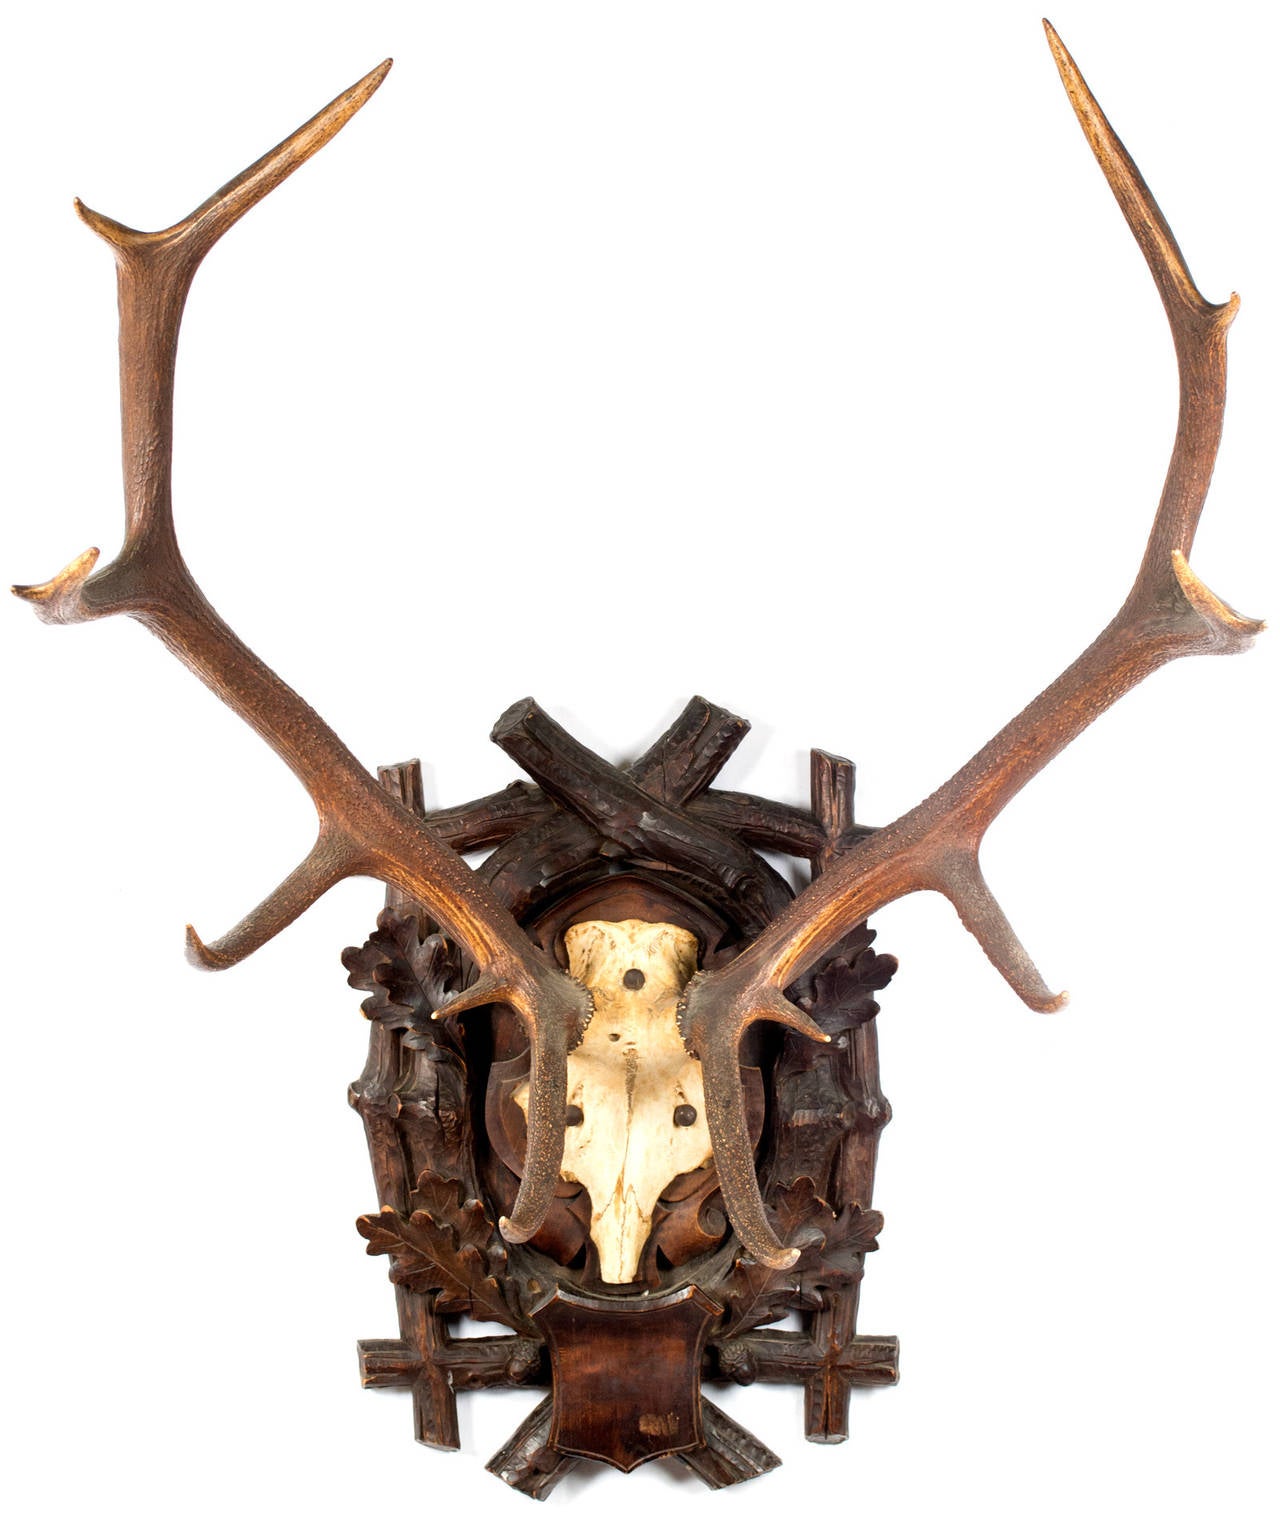 A pair of mature Corsican Red Deer antlers mounted on a linden wood plaque carved with Black Forest motifs of oak leaves and branches.